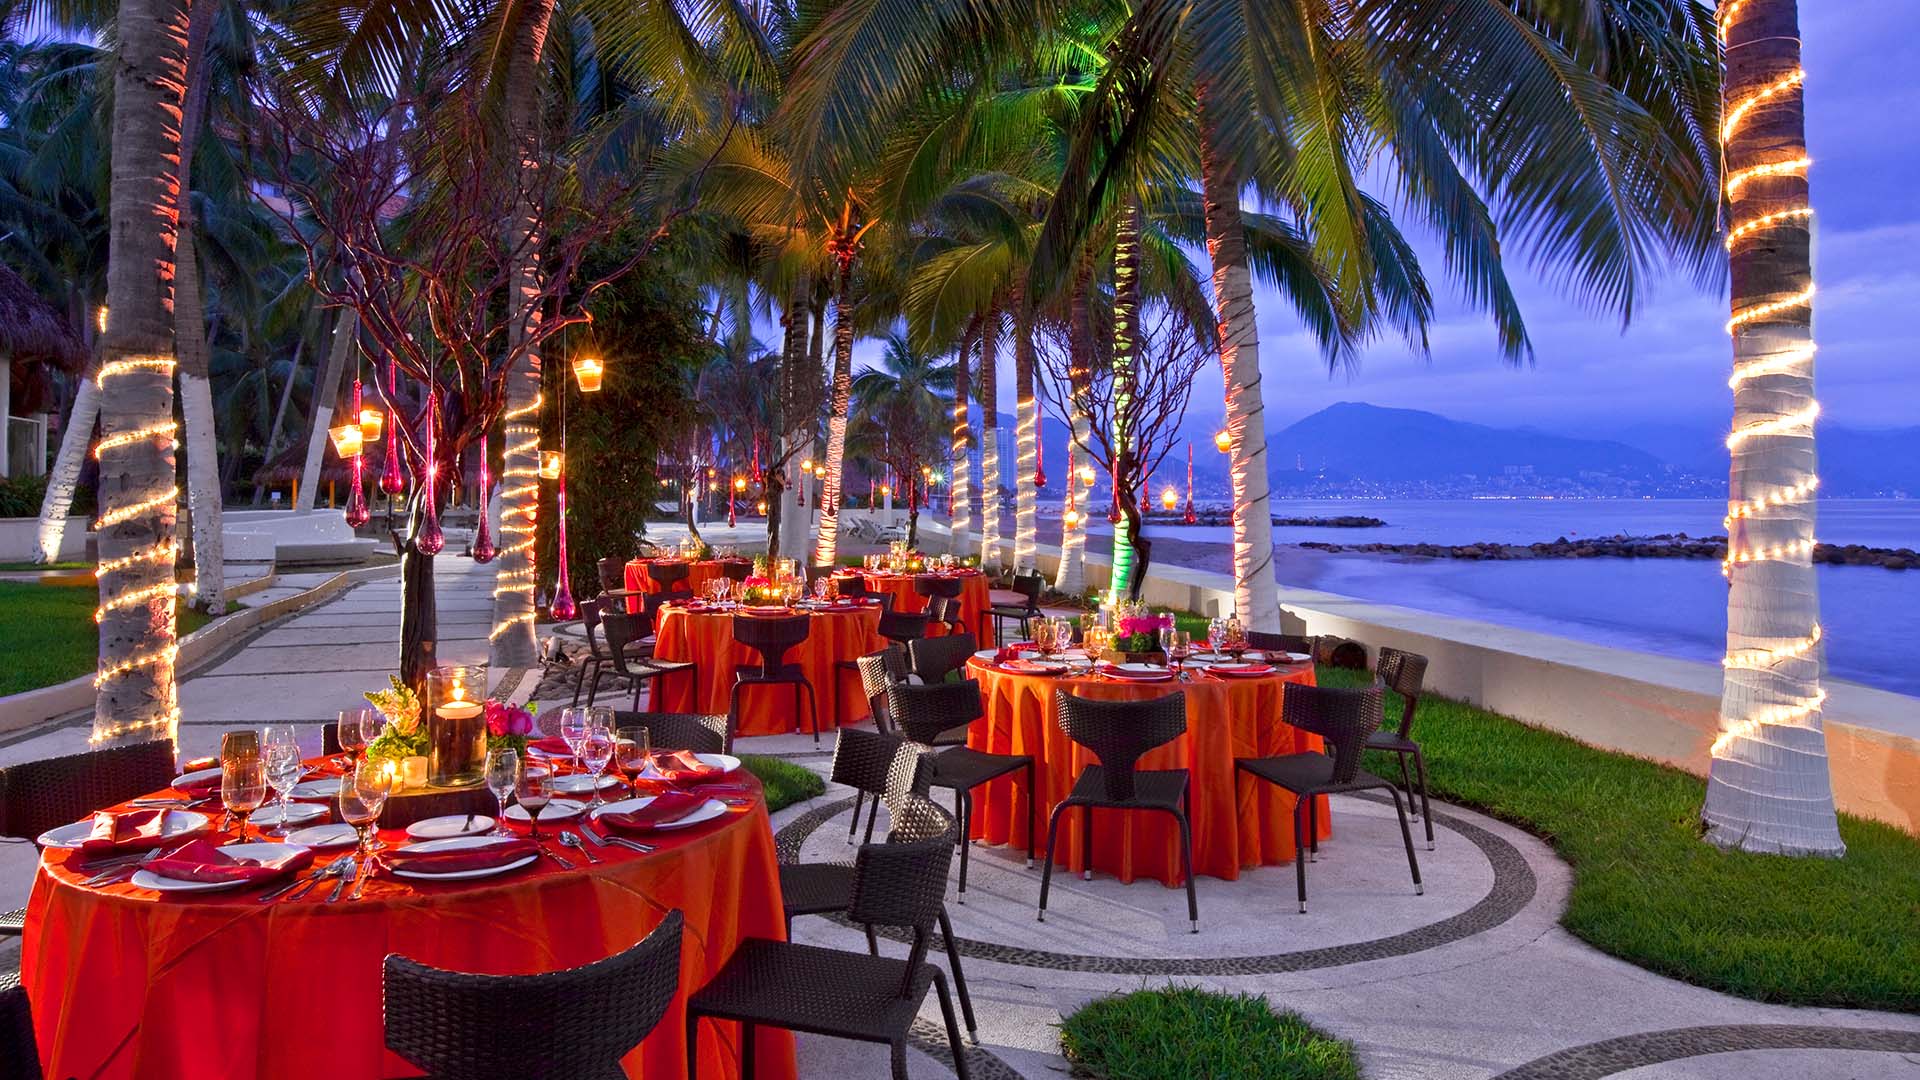 A festively decorated dining area at The Westin Resort & Spa, Puerto Vallarta